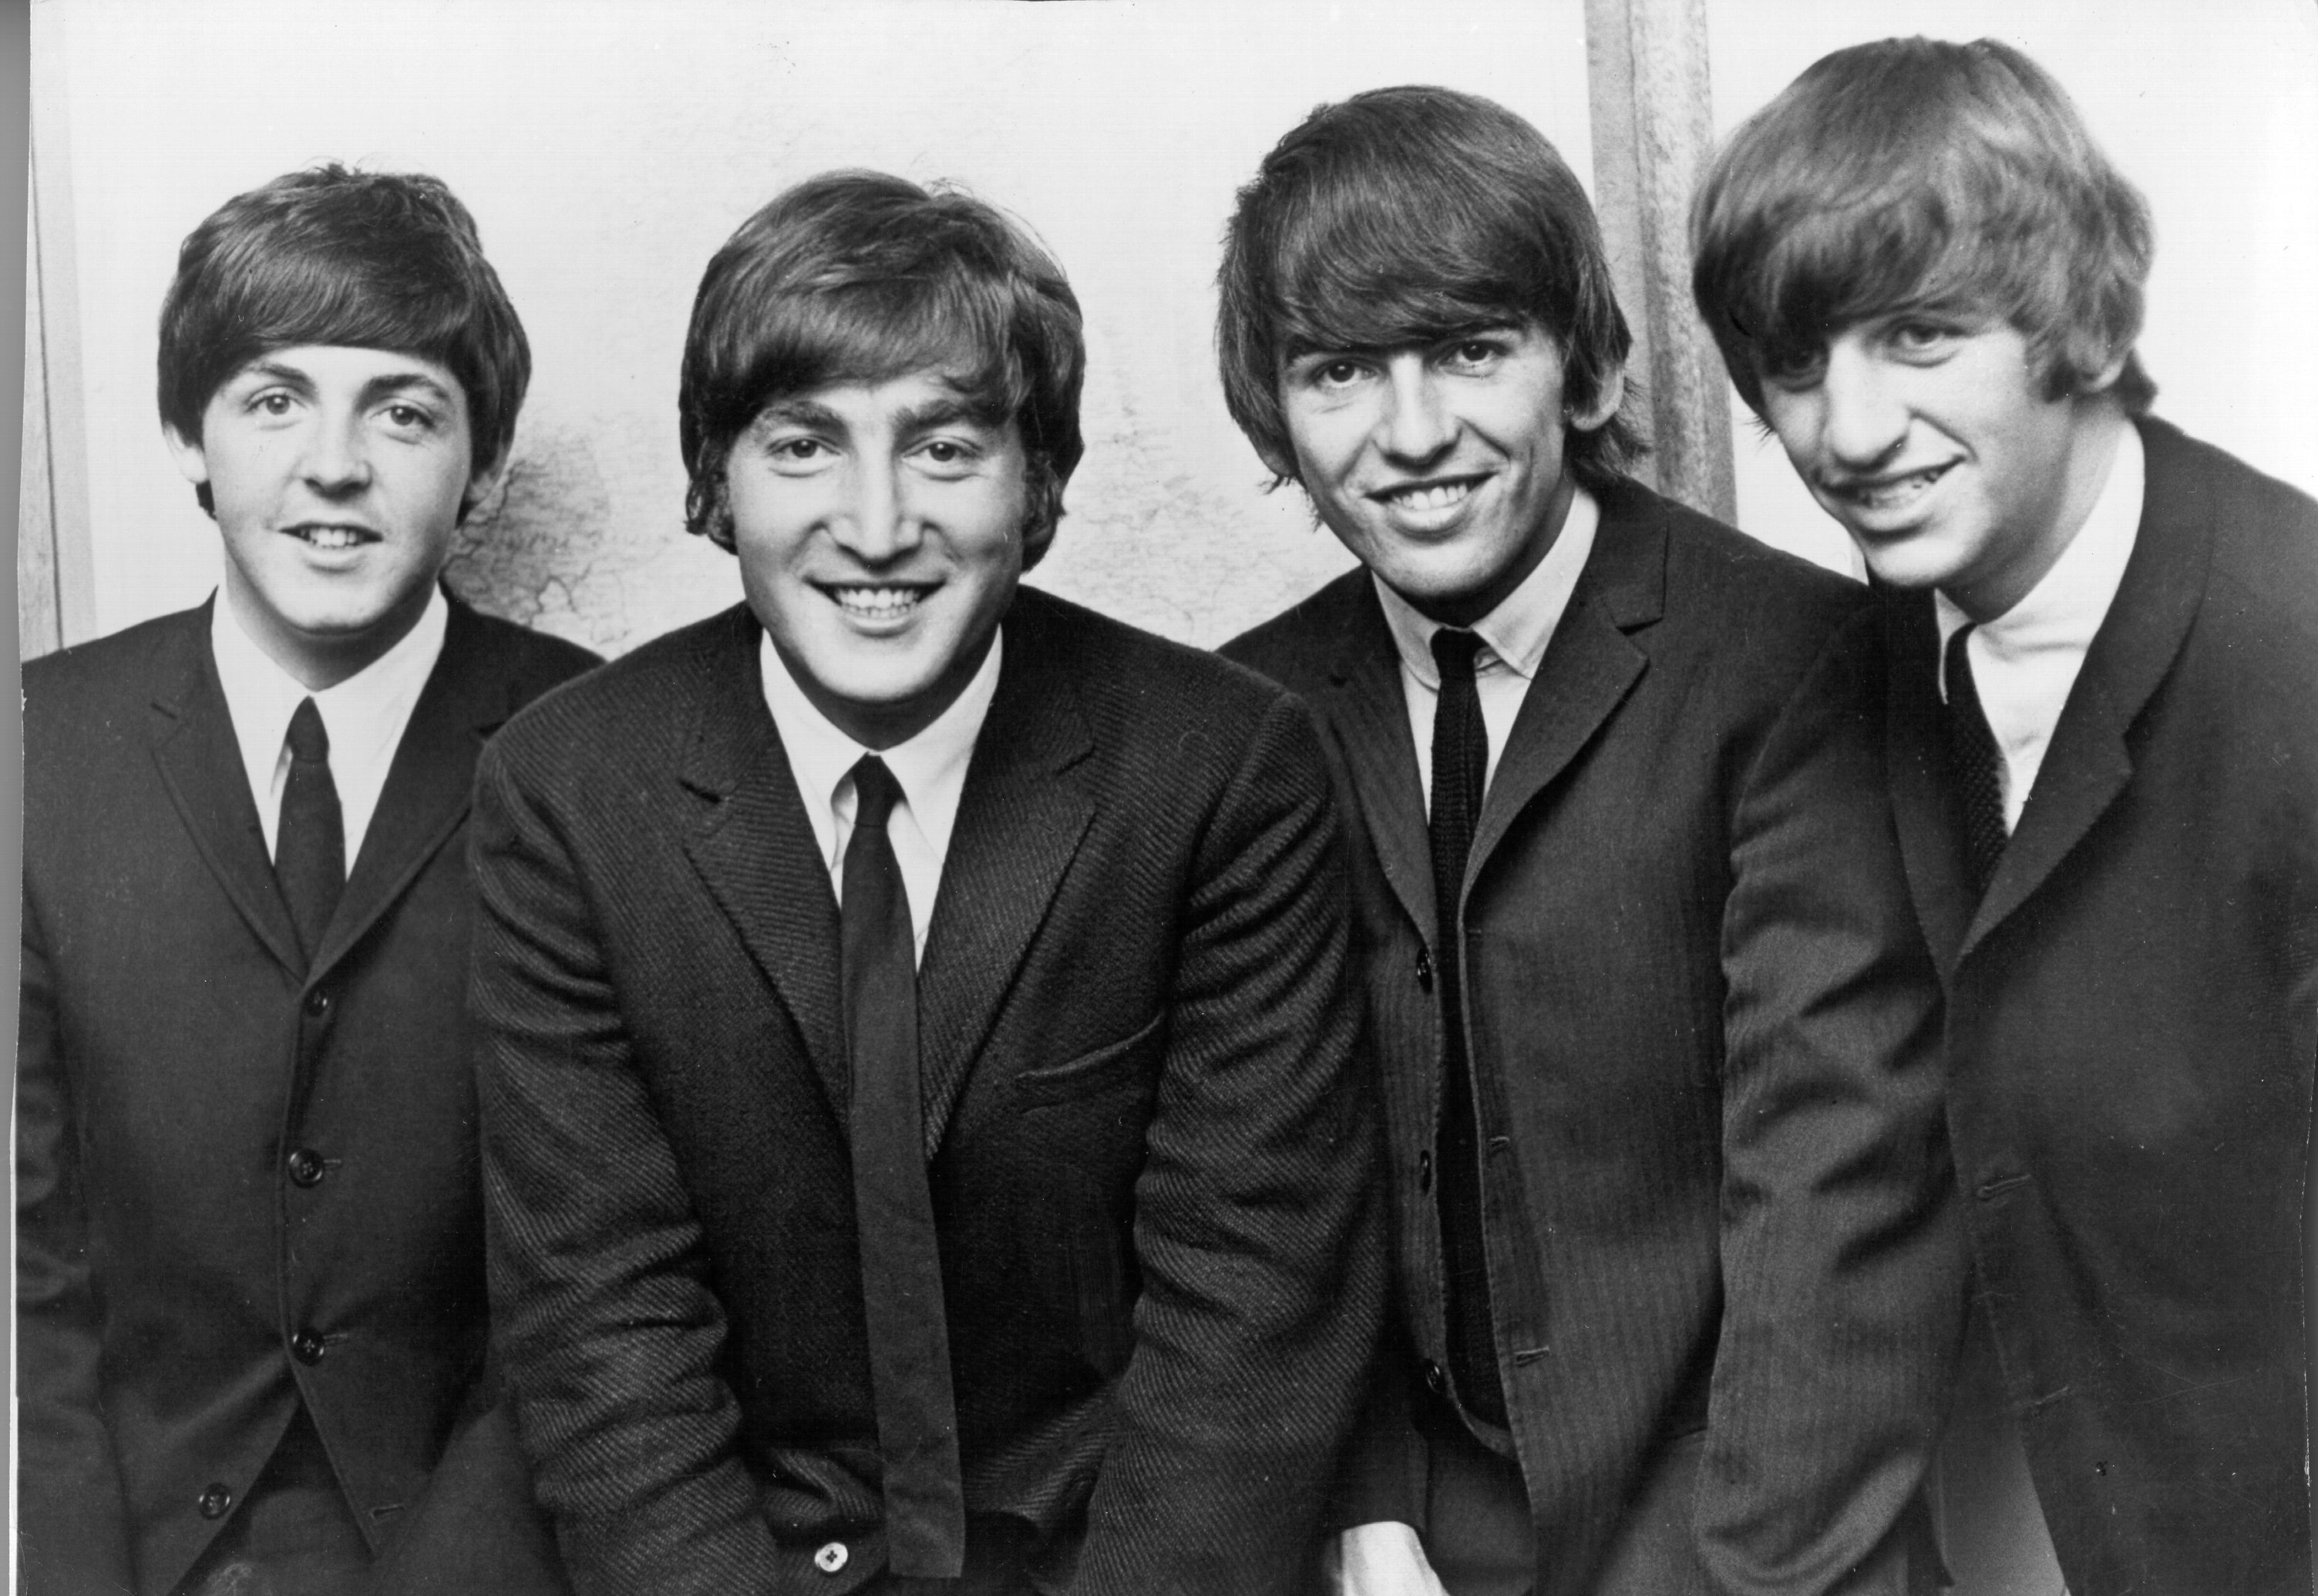 Disney+ Will Premiere ‘The Beatles: Get Back’ Documentary Series This Thanksgiving